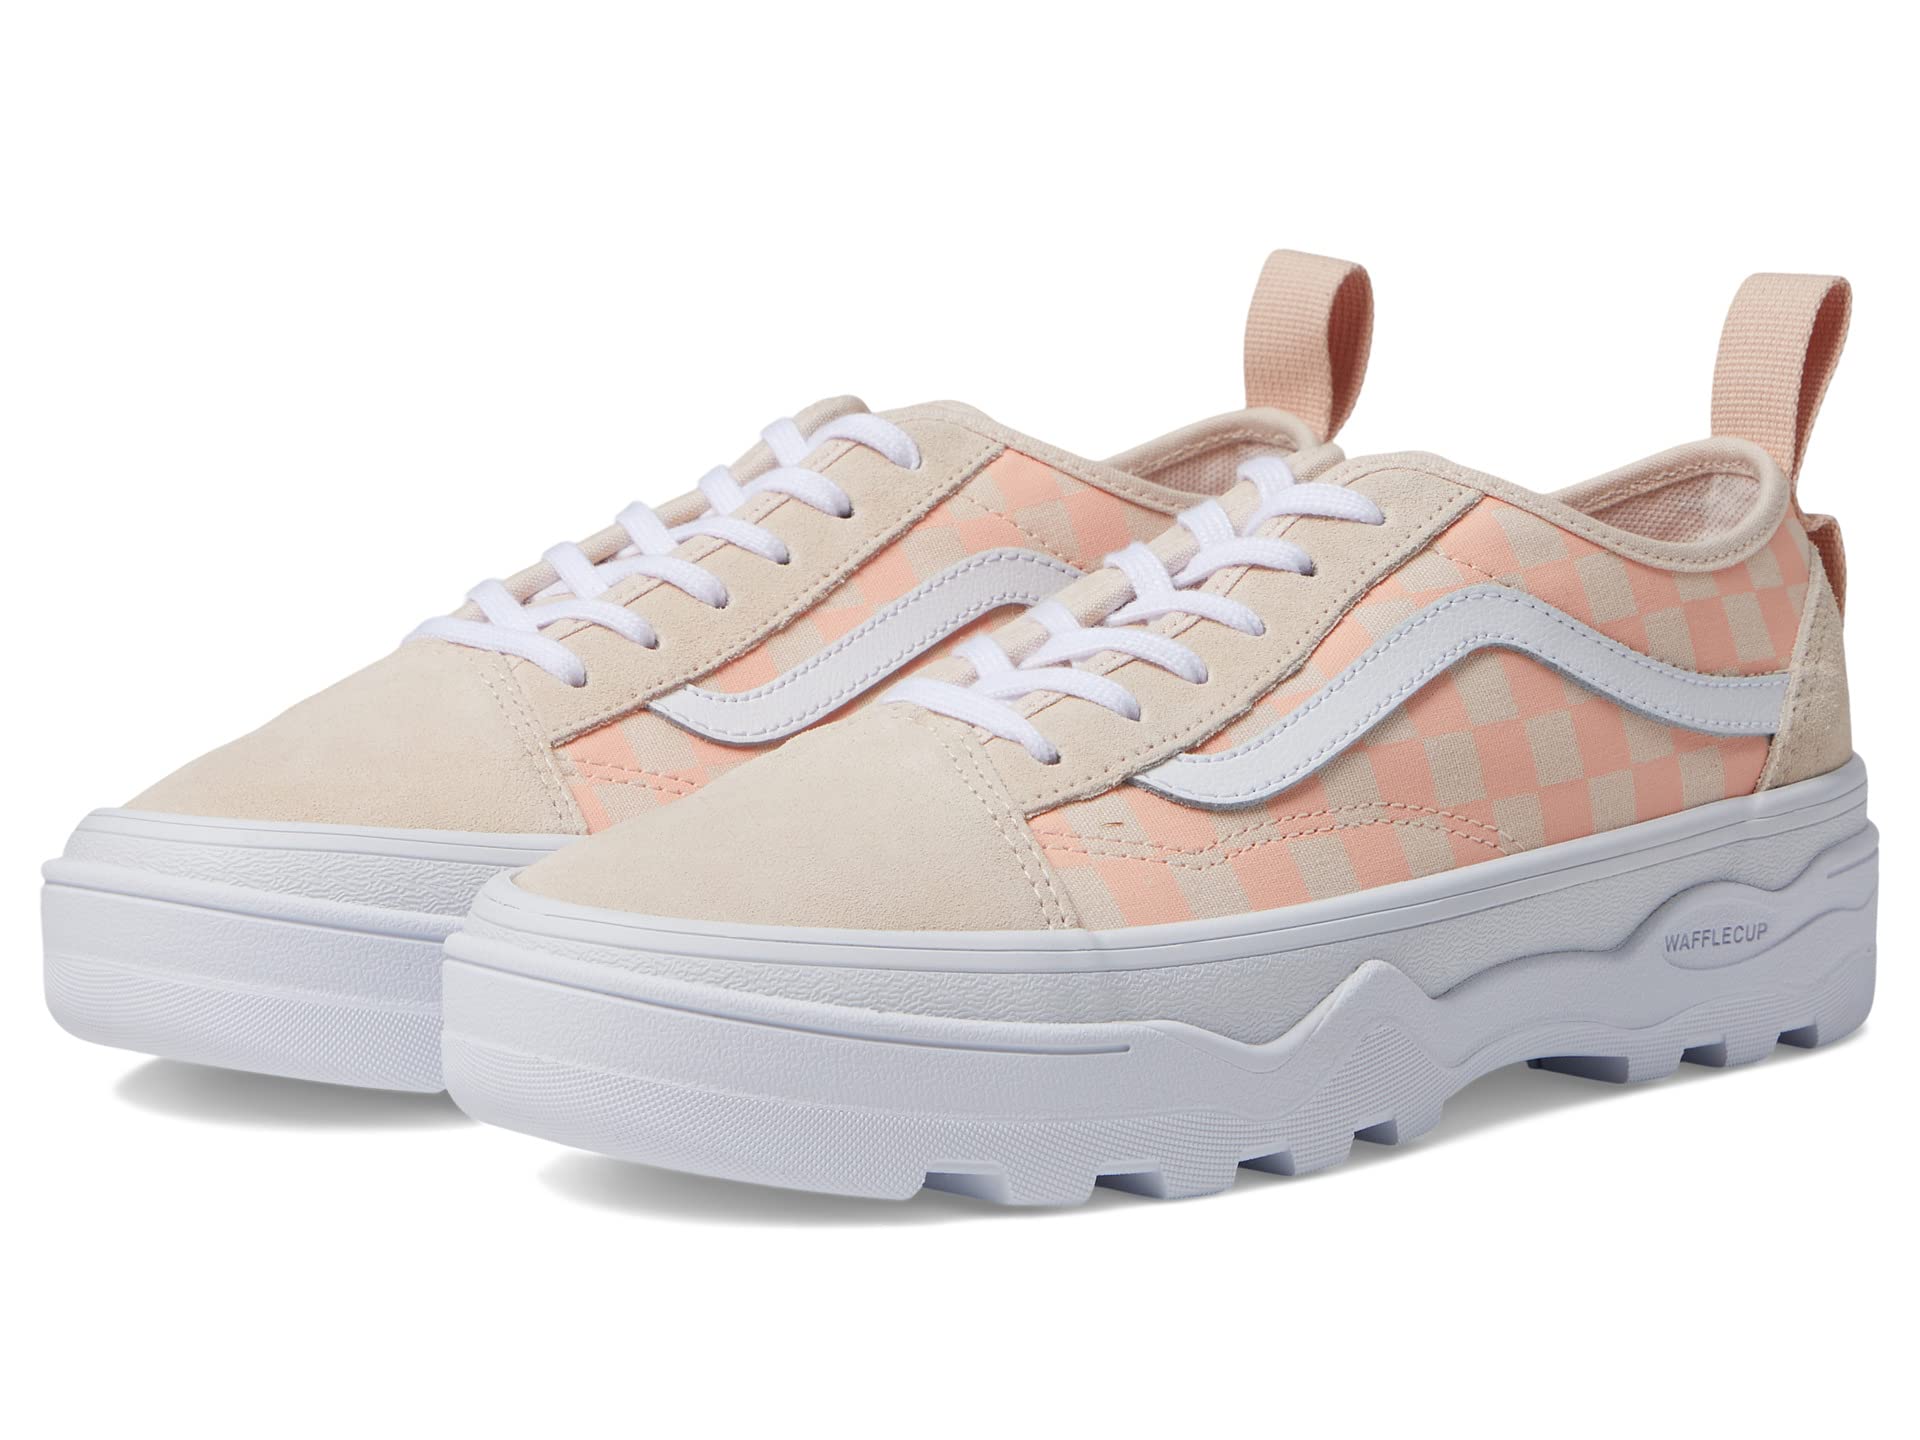 Vans Women's Sentry Old Skool WC Shoes (Checkerboard Peach Dust) $33.98 +  Free Shipping